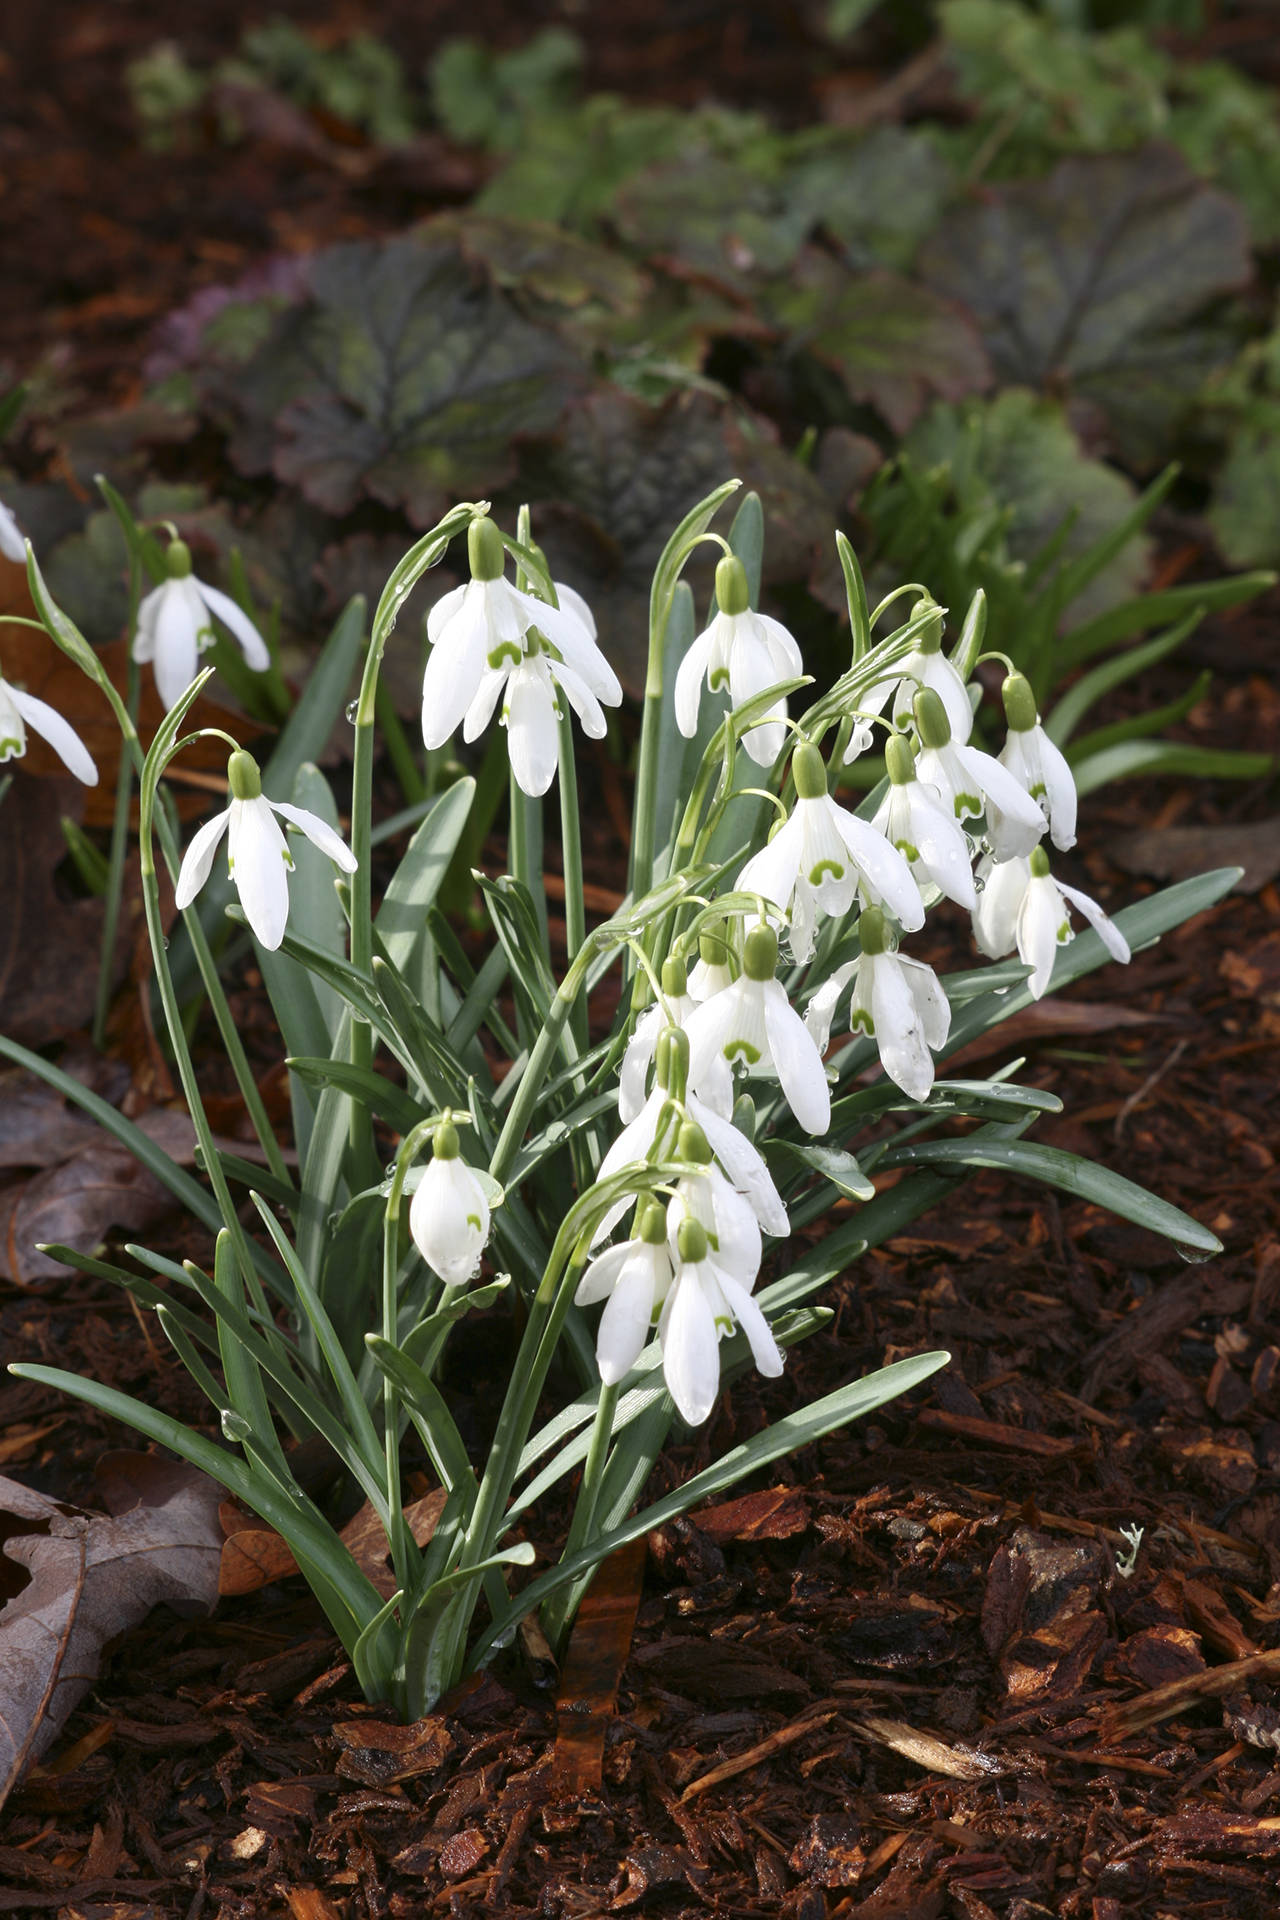 Common snowdrops are long lived and lend themselves to dividing and naturalizing in the landscape. (Richie Steffen)